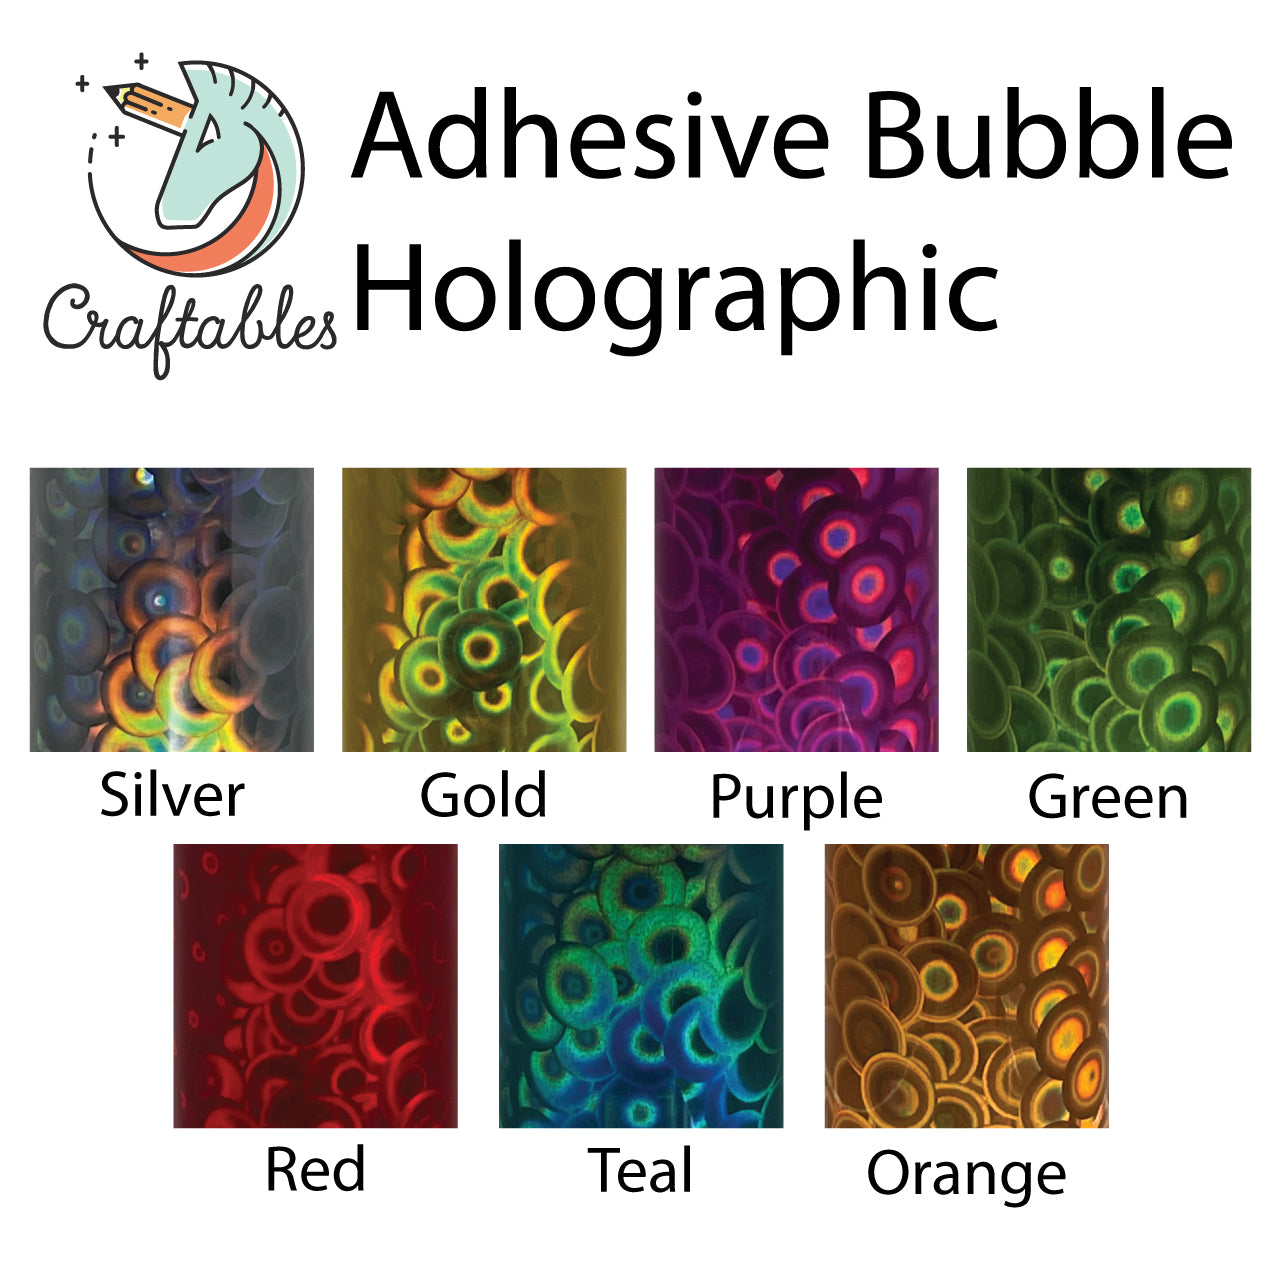 Teal Bubble Holographic Adhesive Vinyl Rolls By Craftables